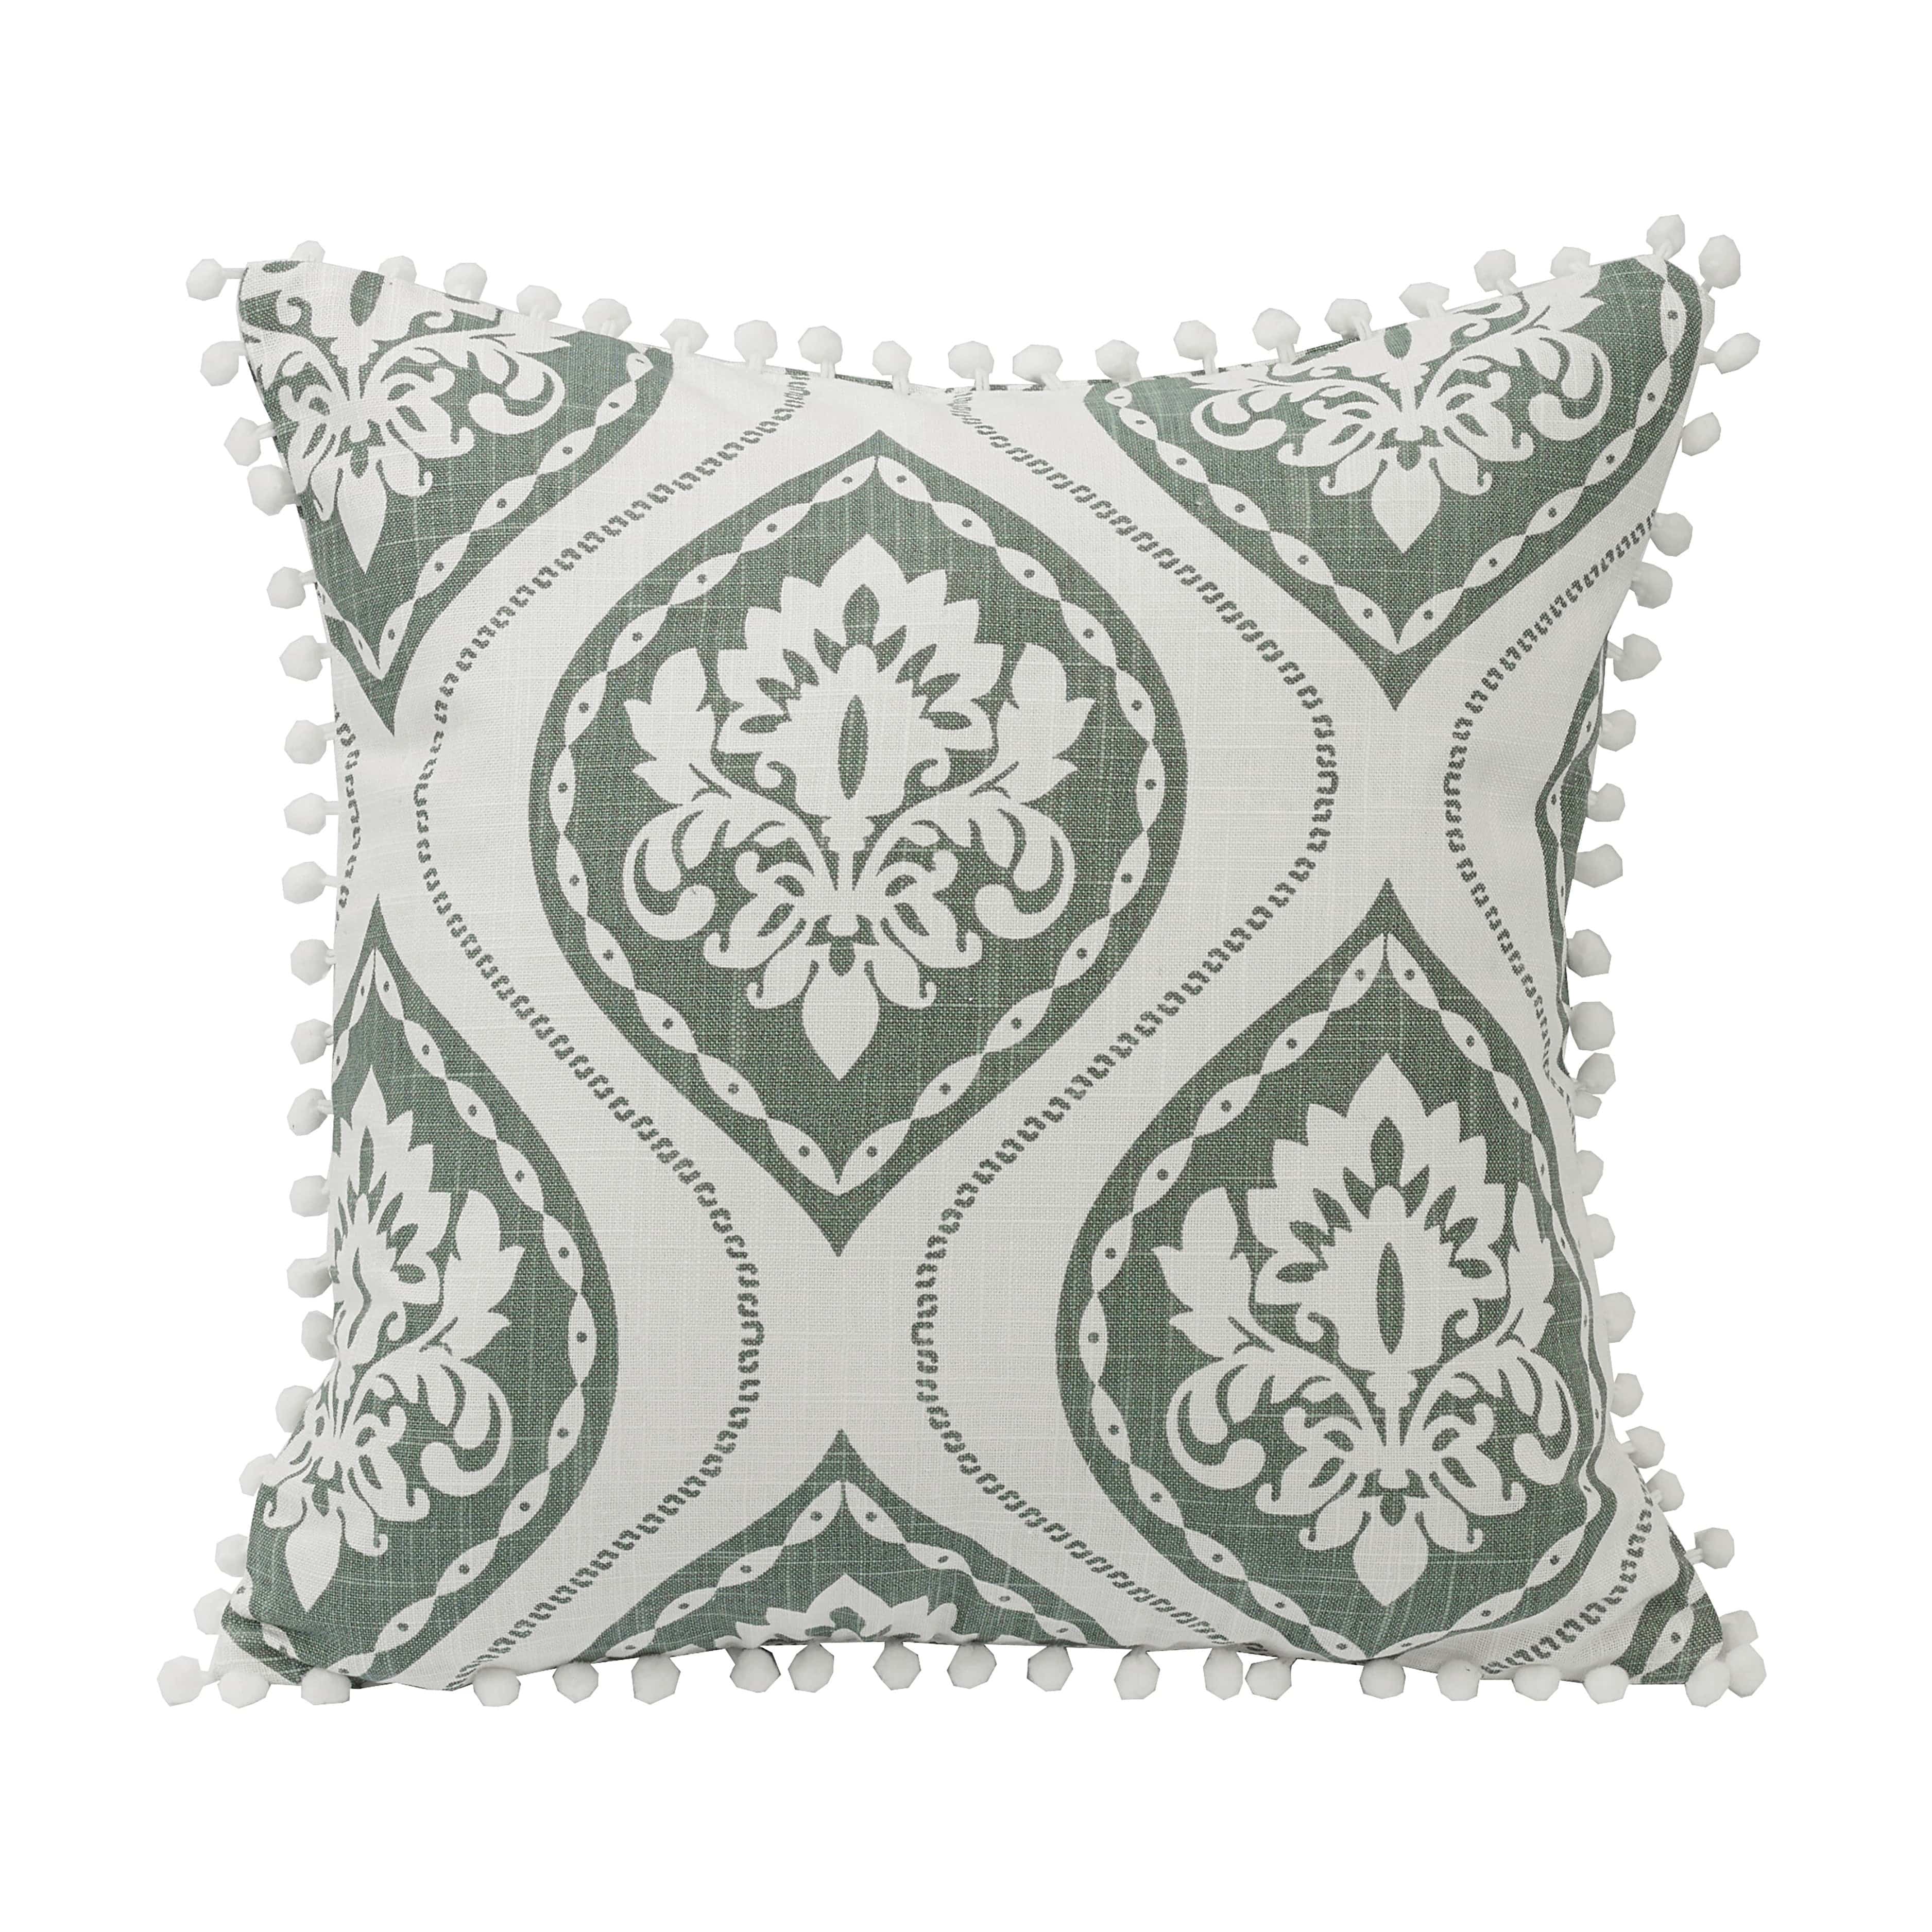 HiEnd Accents Ruffle Trim and Lace/Ruffle Accent Pillow